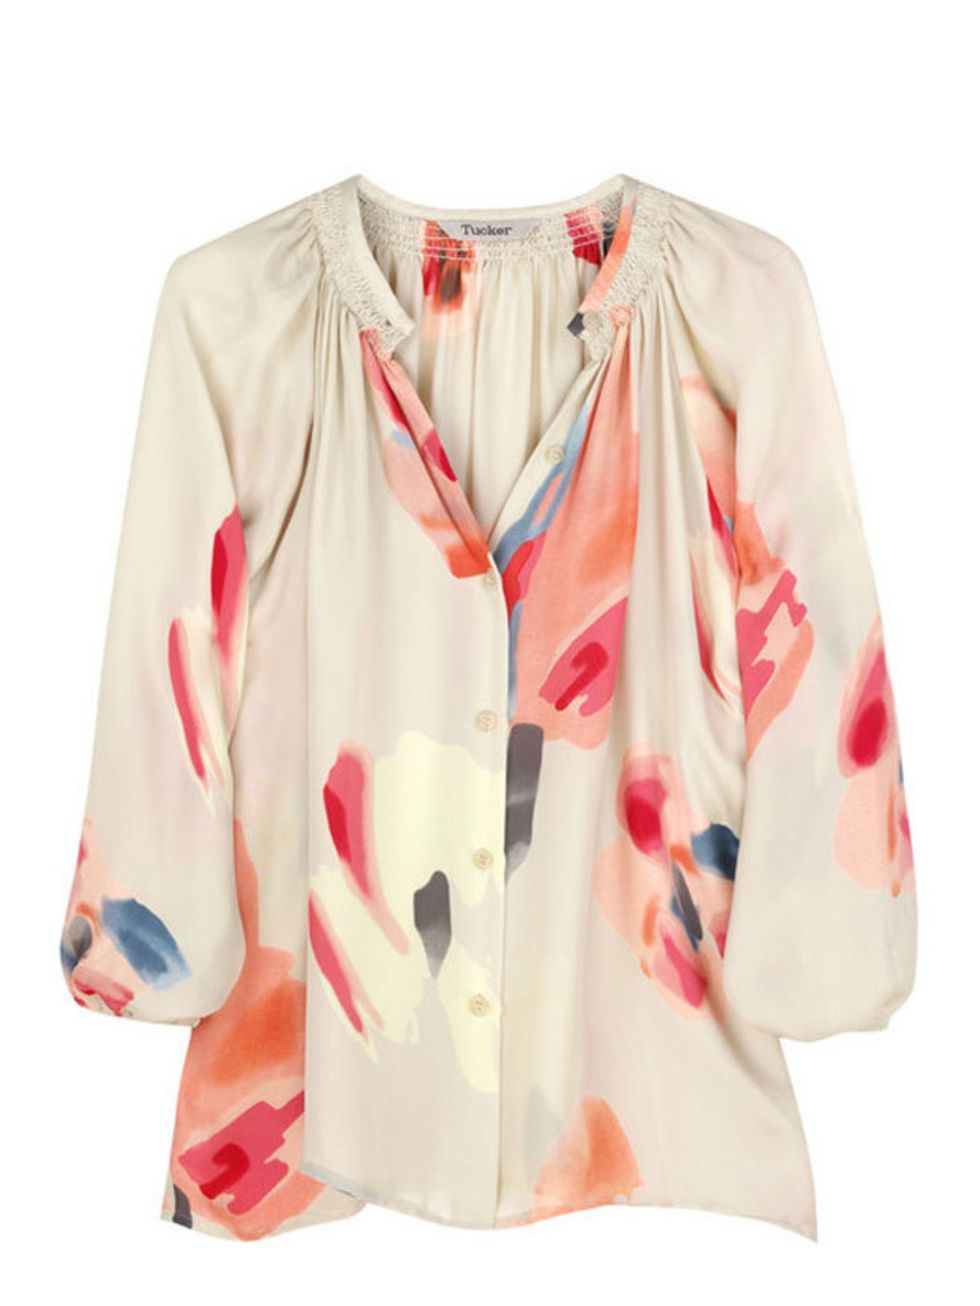 <p>Floral silk blouse, £230, by Tucker at <a href="http://www.net-a-porter.com/product/62142">Net-a-Porter</a> </p>